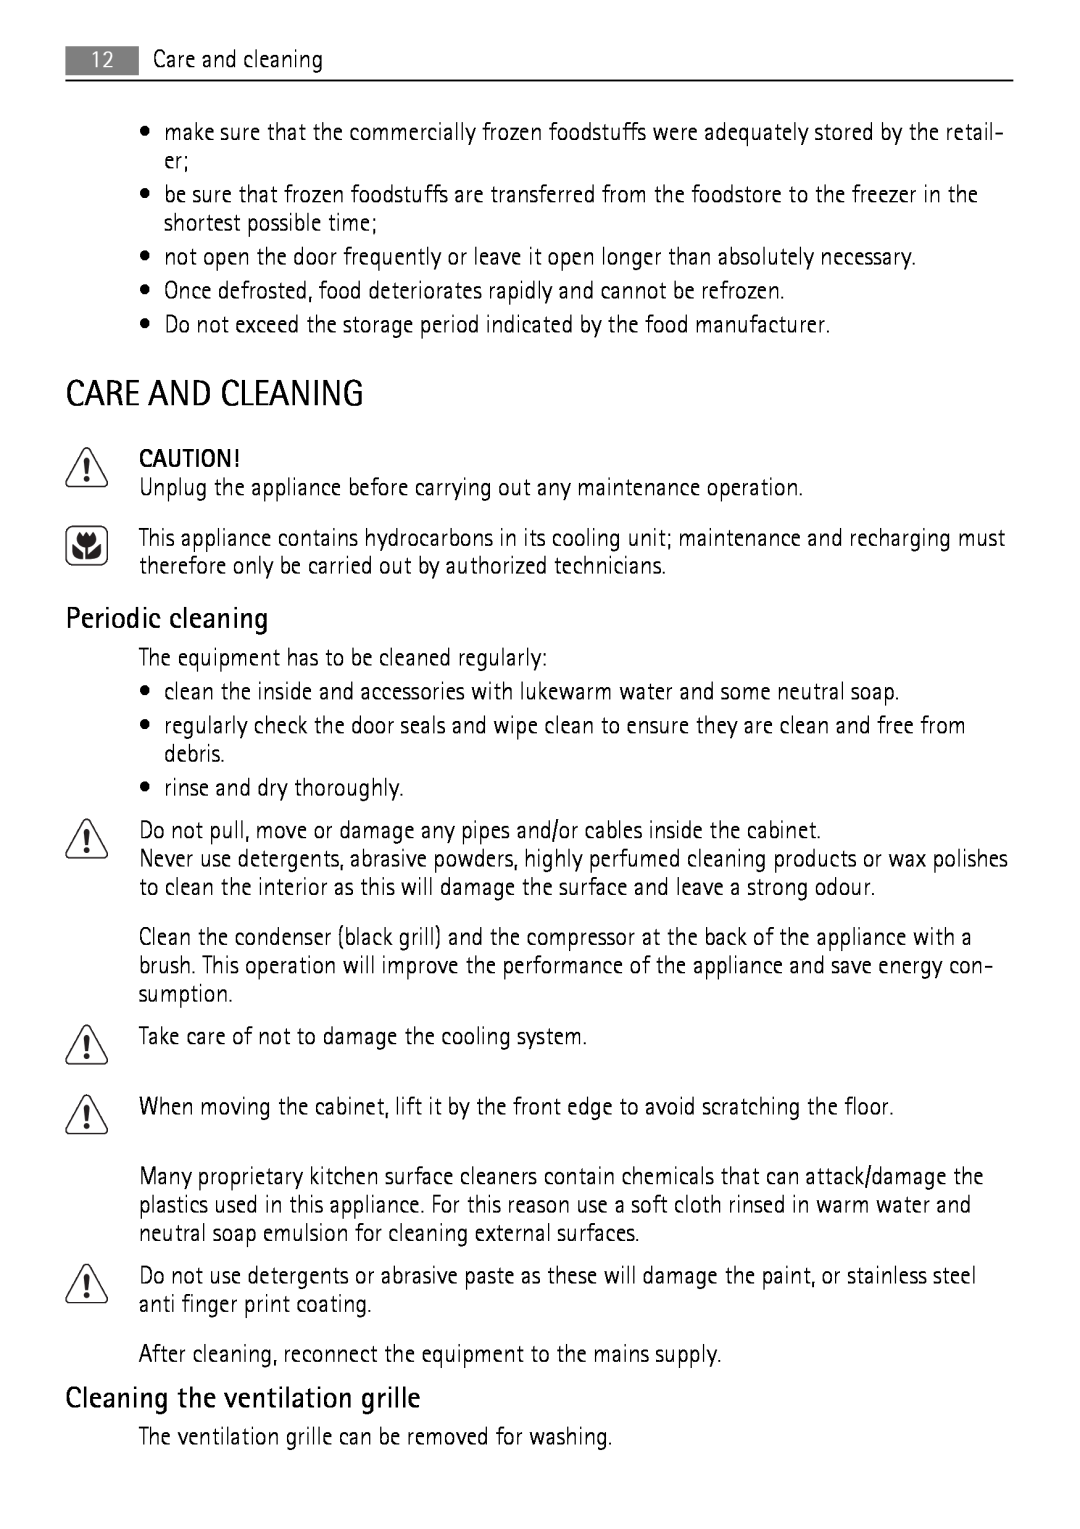 AEG A73100GNW0, A72700GNW0 user manual Care And Cleaning, Periodic cleaning, Cleaning the ventilation grille 